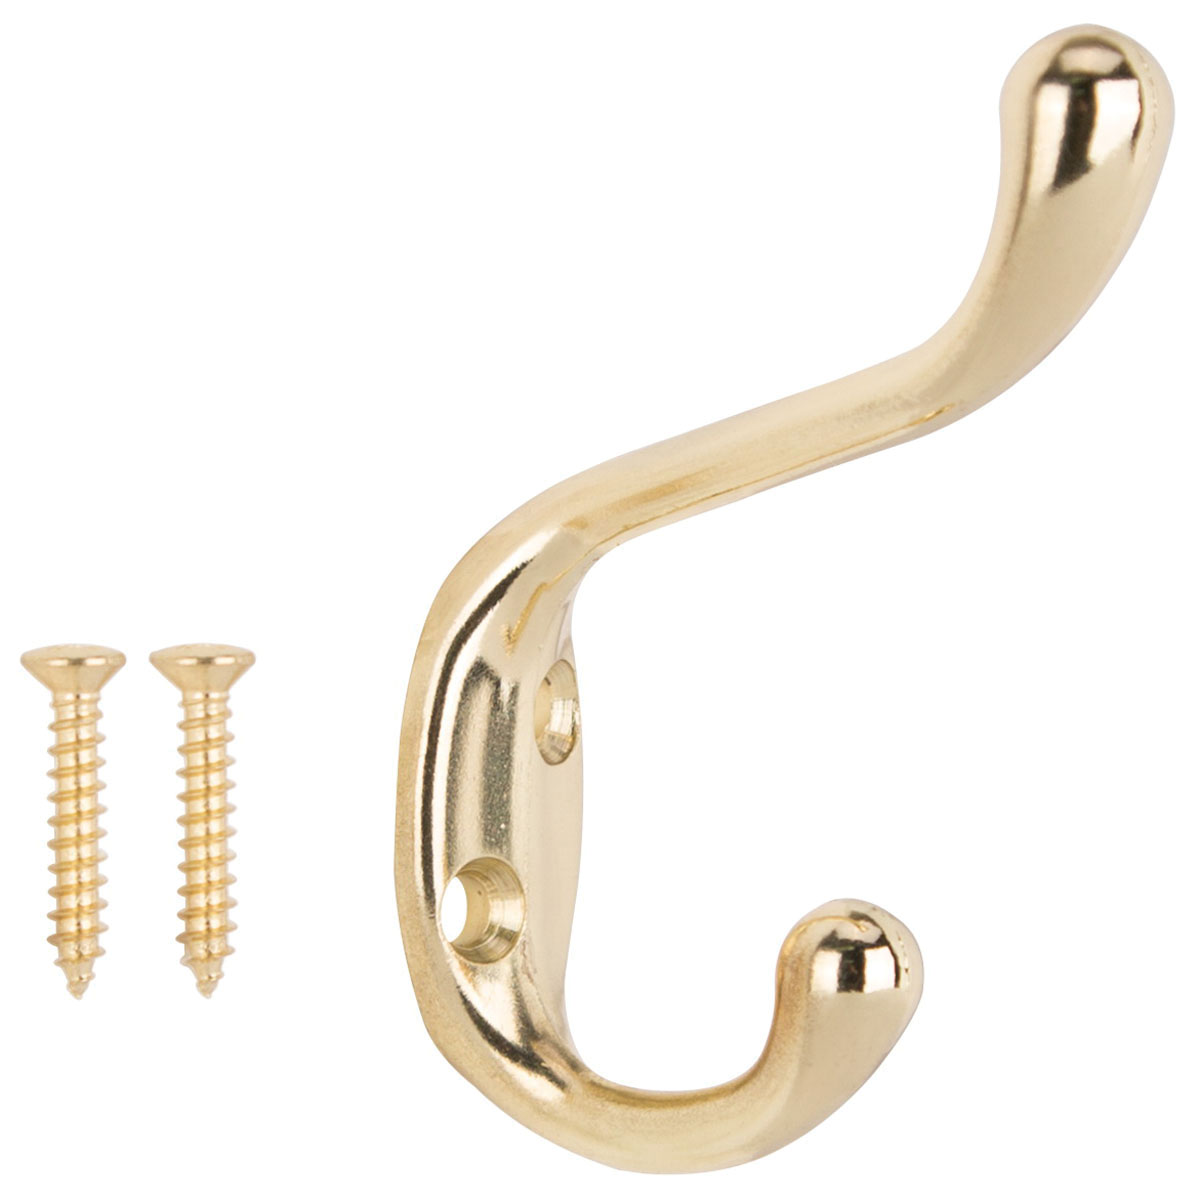 H6271007PB-PS Coat and Hat Hook, 22 lb, 2-Hook, 1-1/64 in Opening, Zinc, Polished Brass